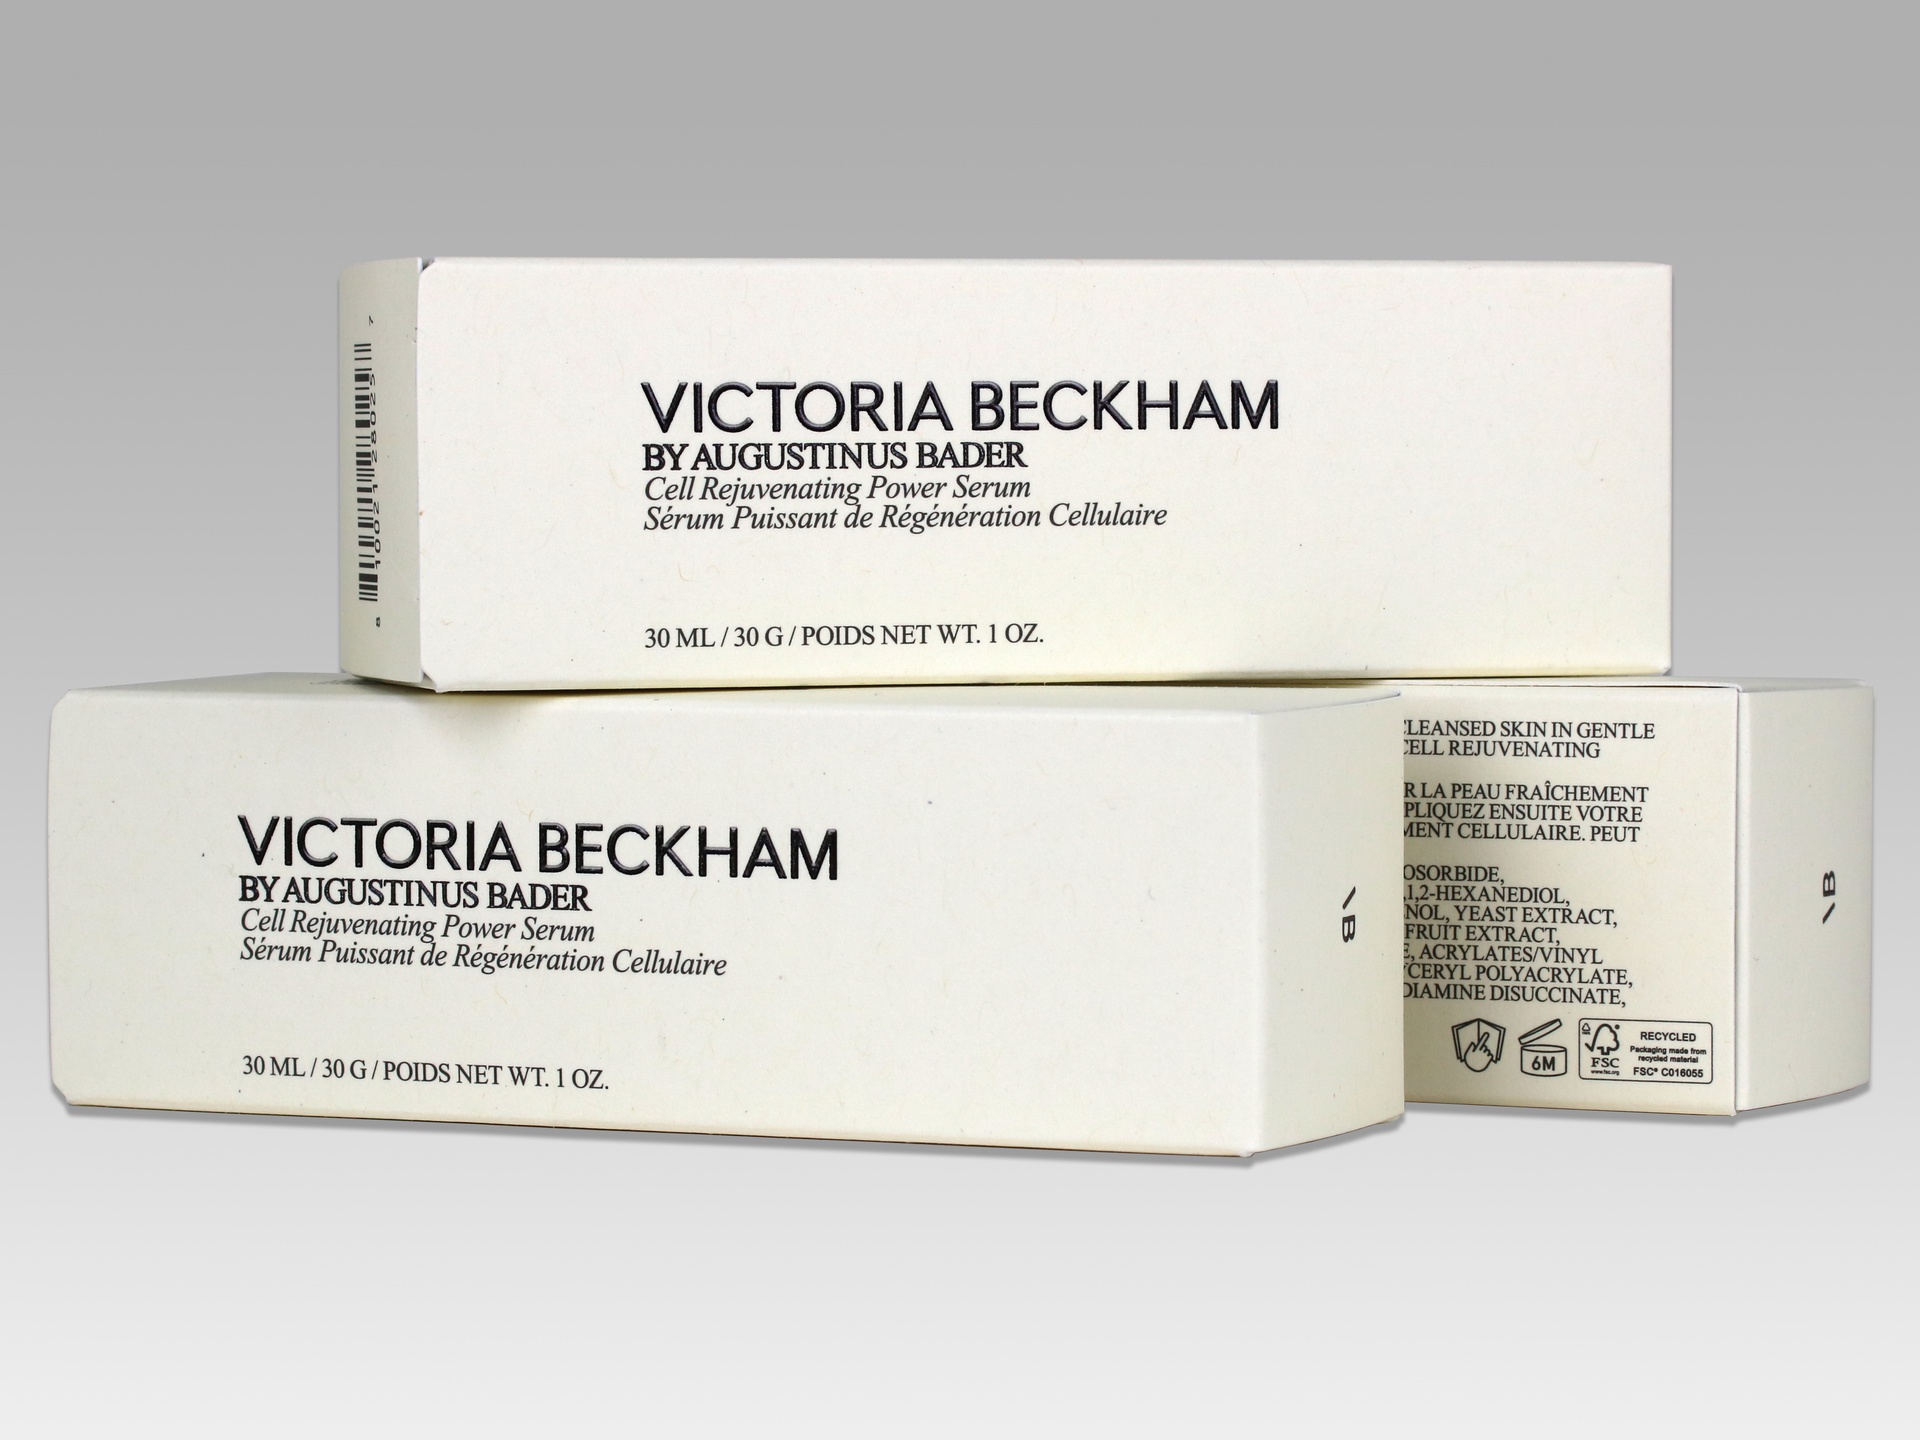 Victoria Beckham folding cartons were converted utilizing Neenah 100 PC White, which is made from 100% Post Consumer Waste (PCW) fibers.